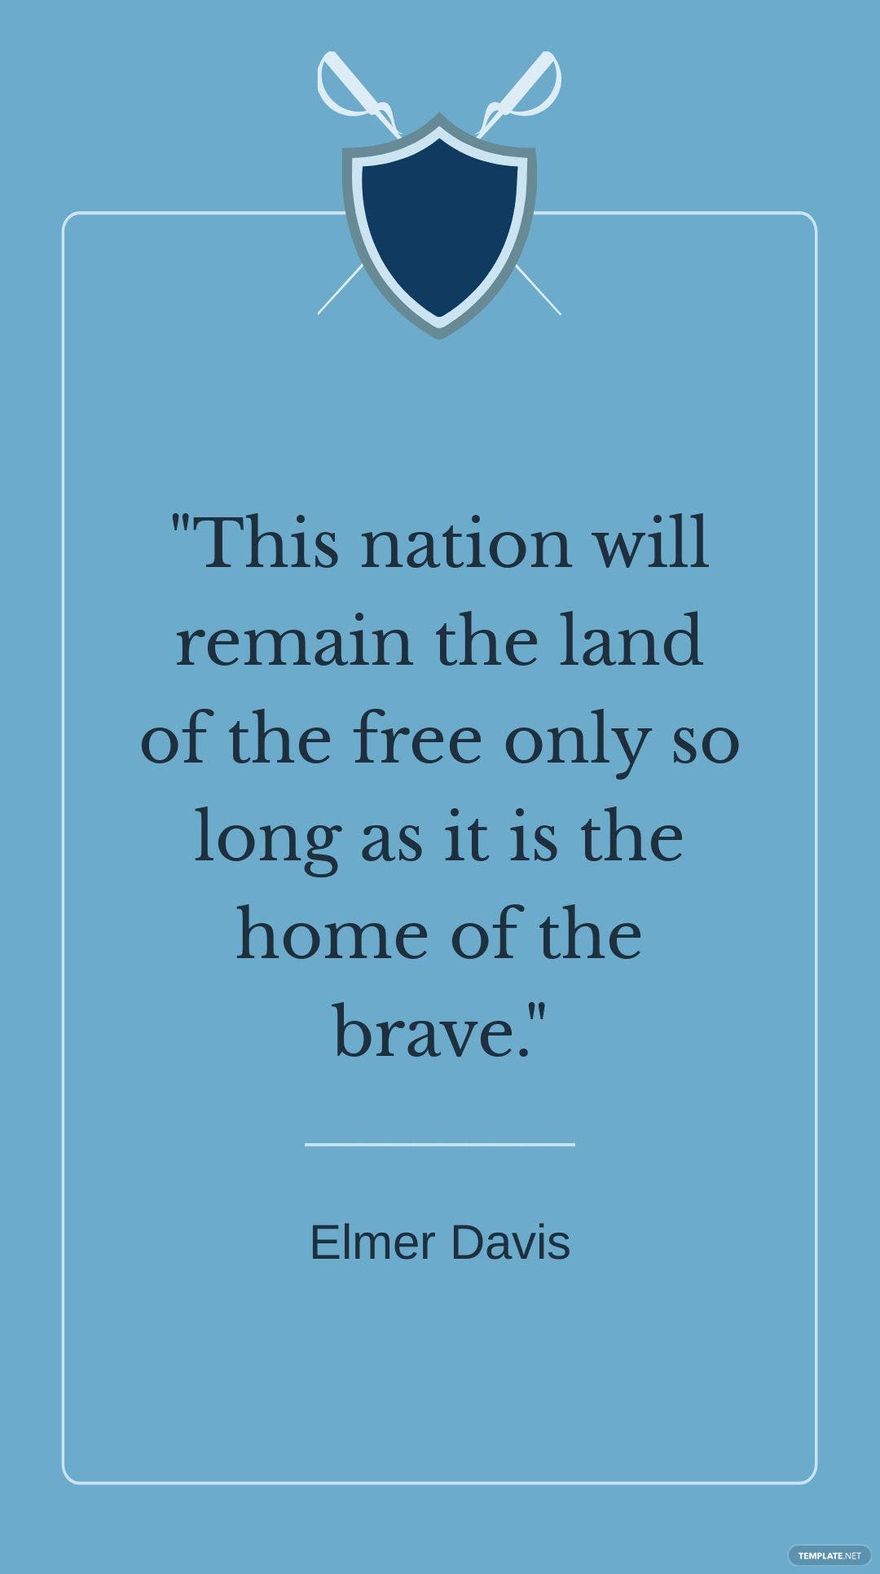 Free Elmer Davis - This nation will remain the land of the only so long as it is the home of the brave in JPG